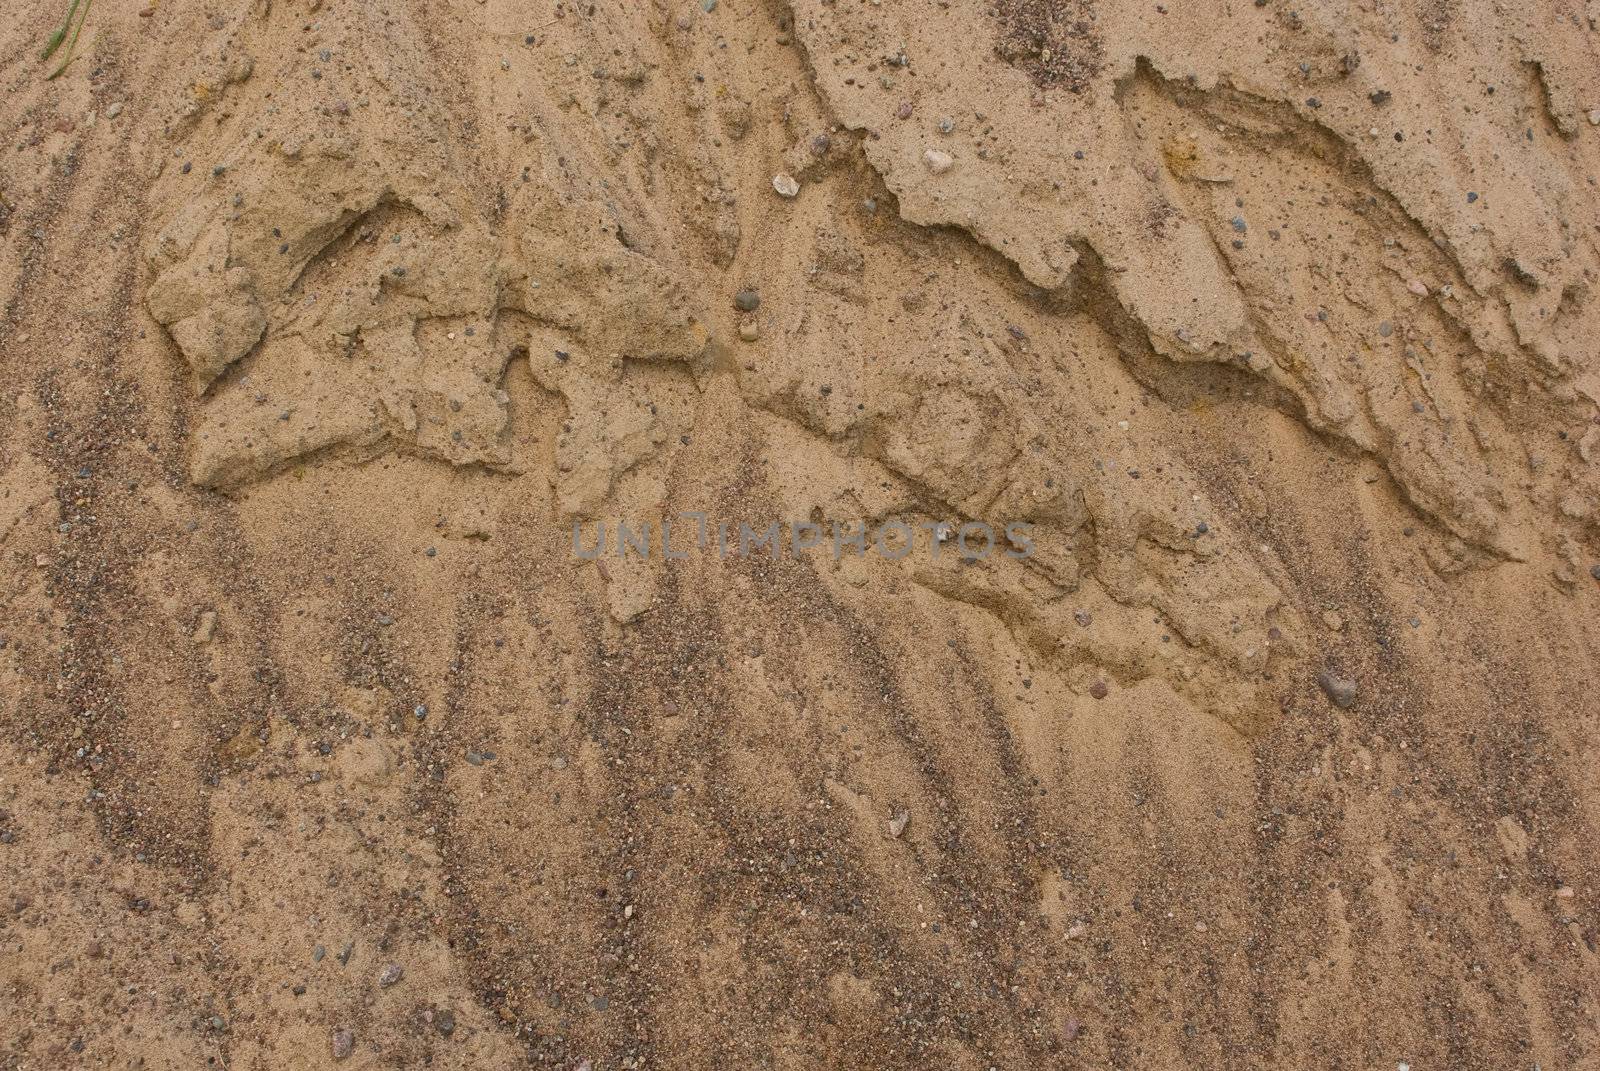 Weathered texture of sand pile surface as background